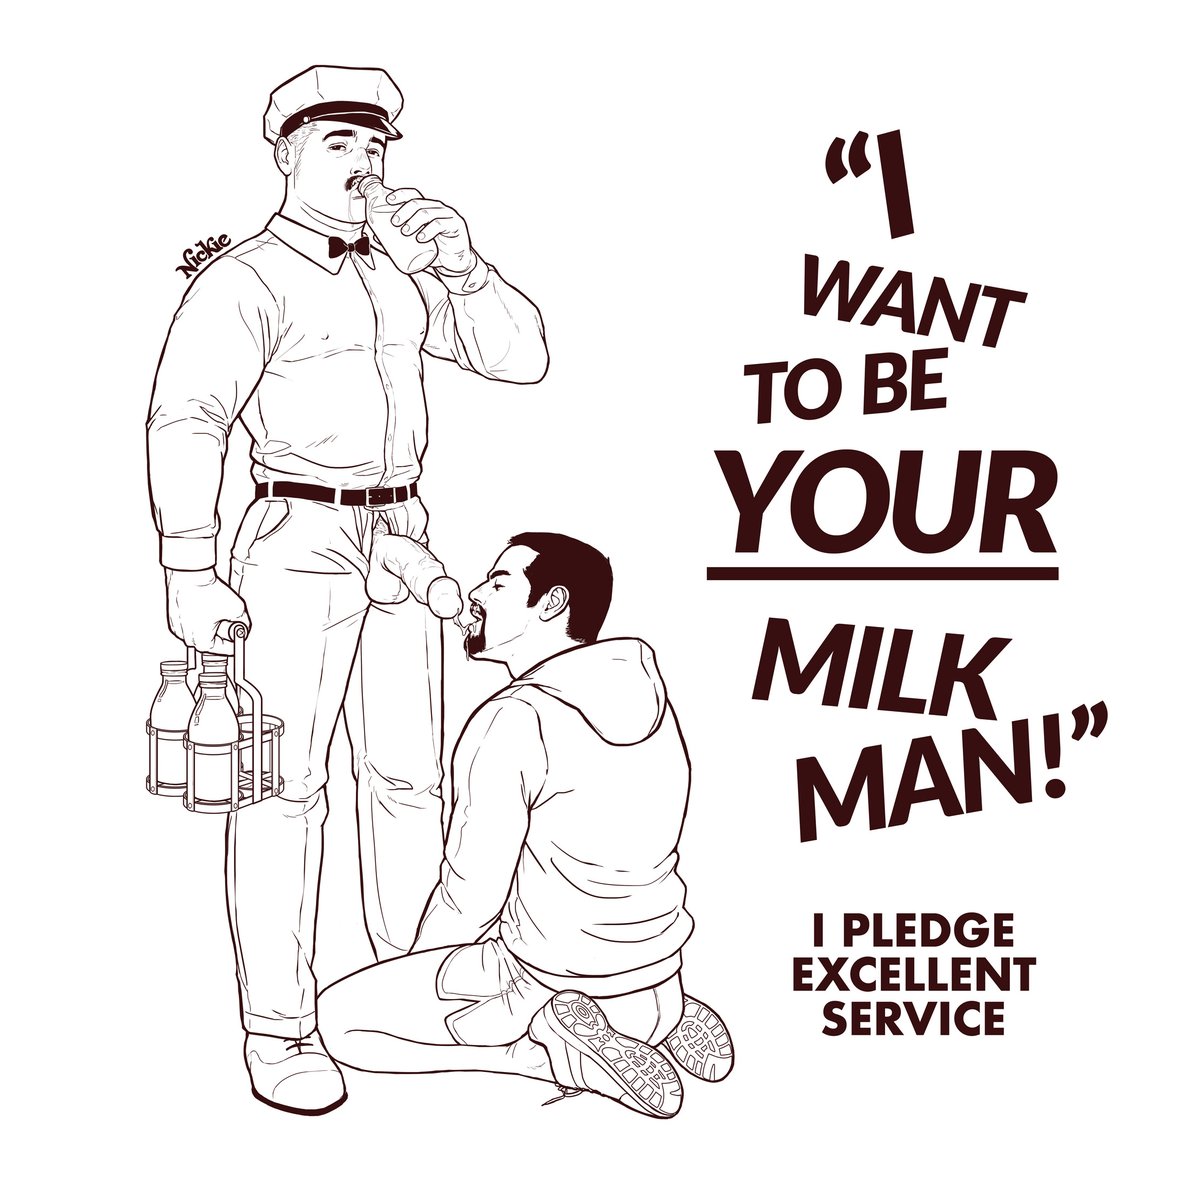 This might be too much for RedBubble but here's the Milkman delivering...